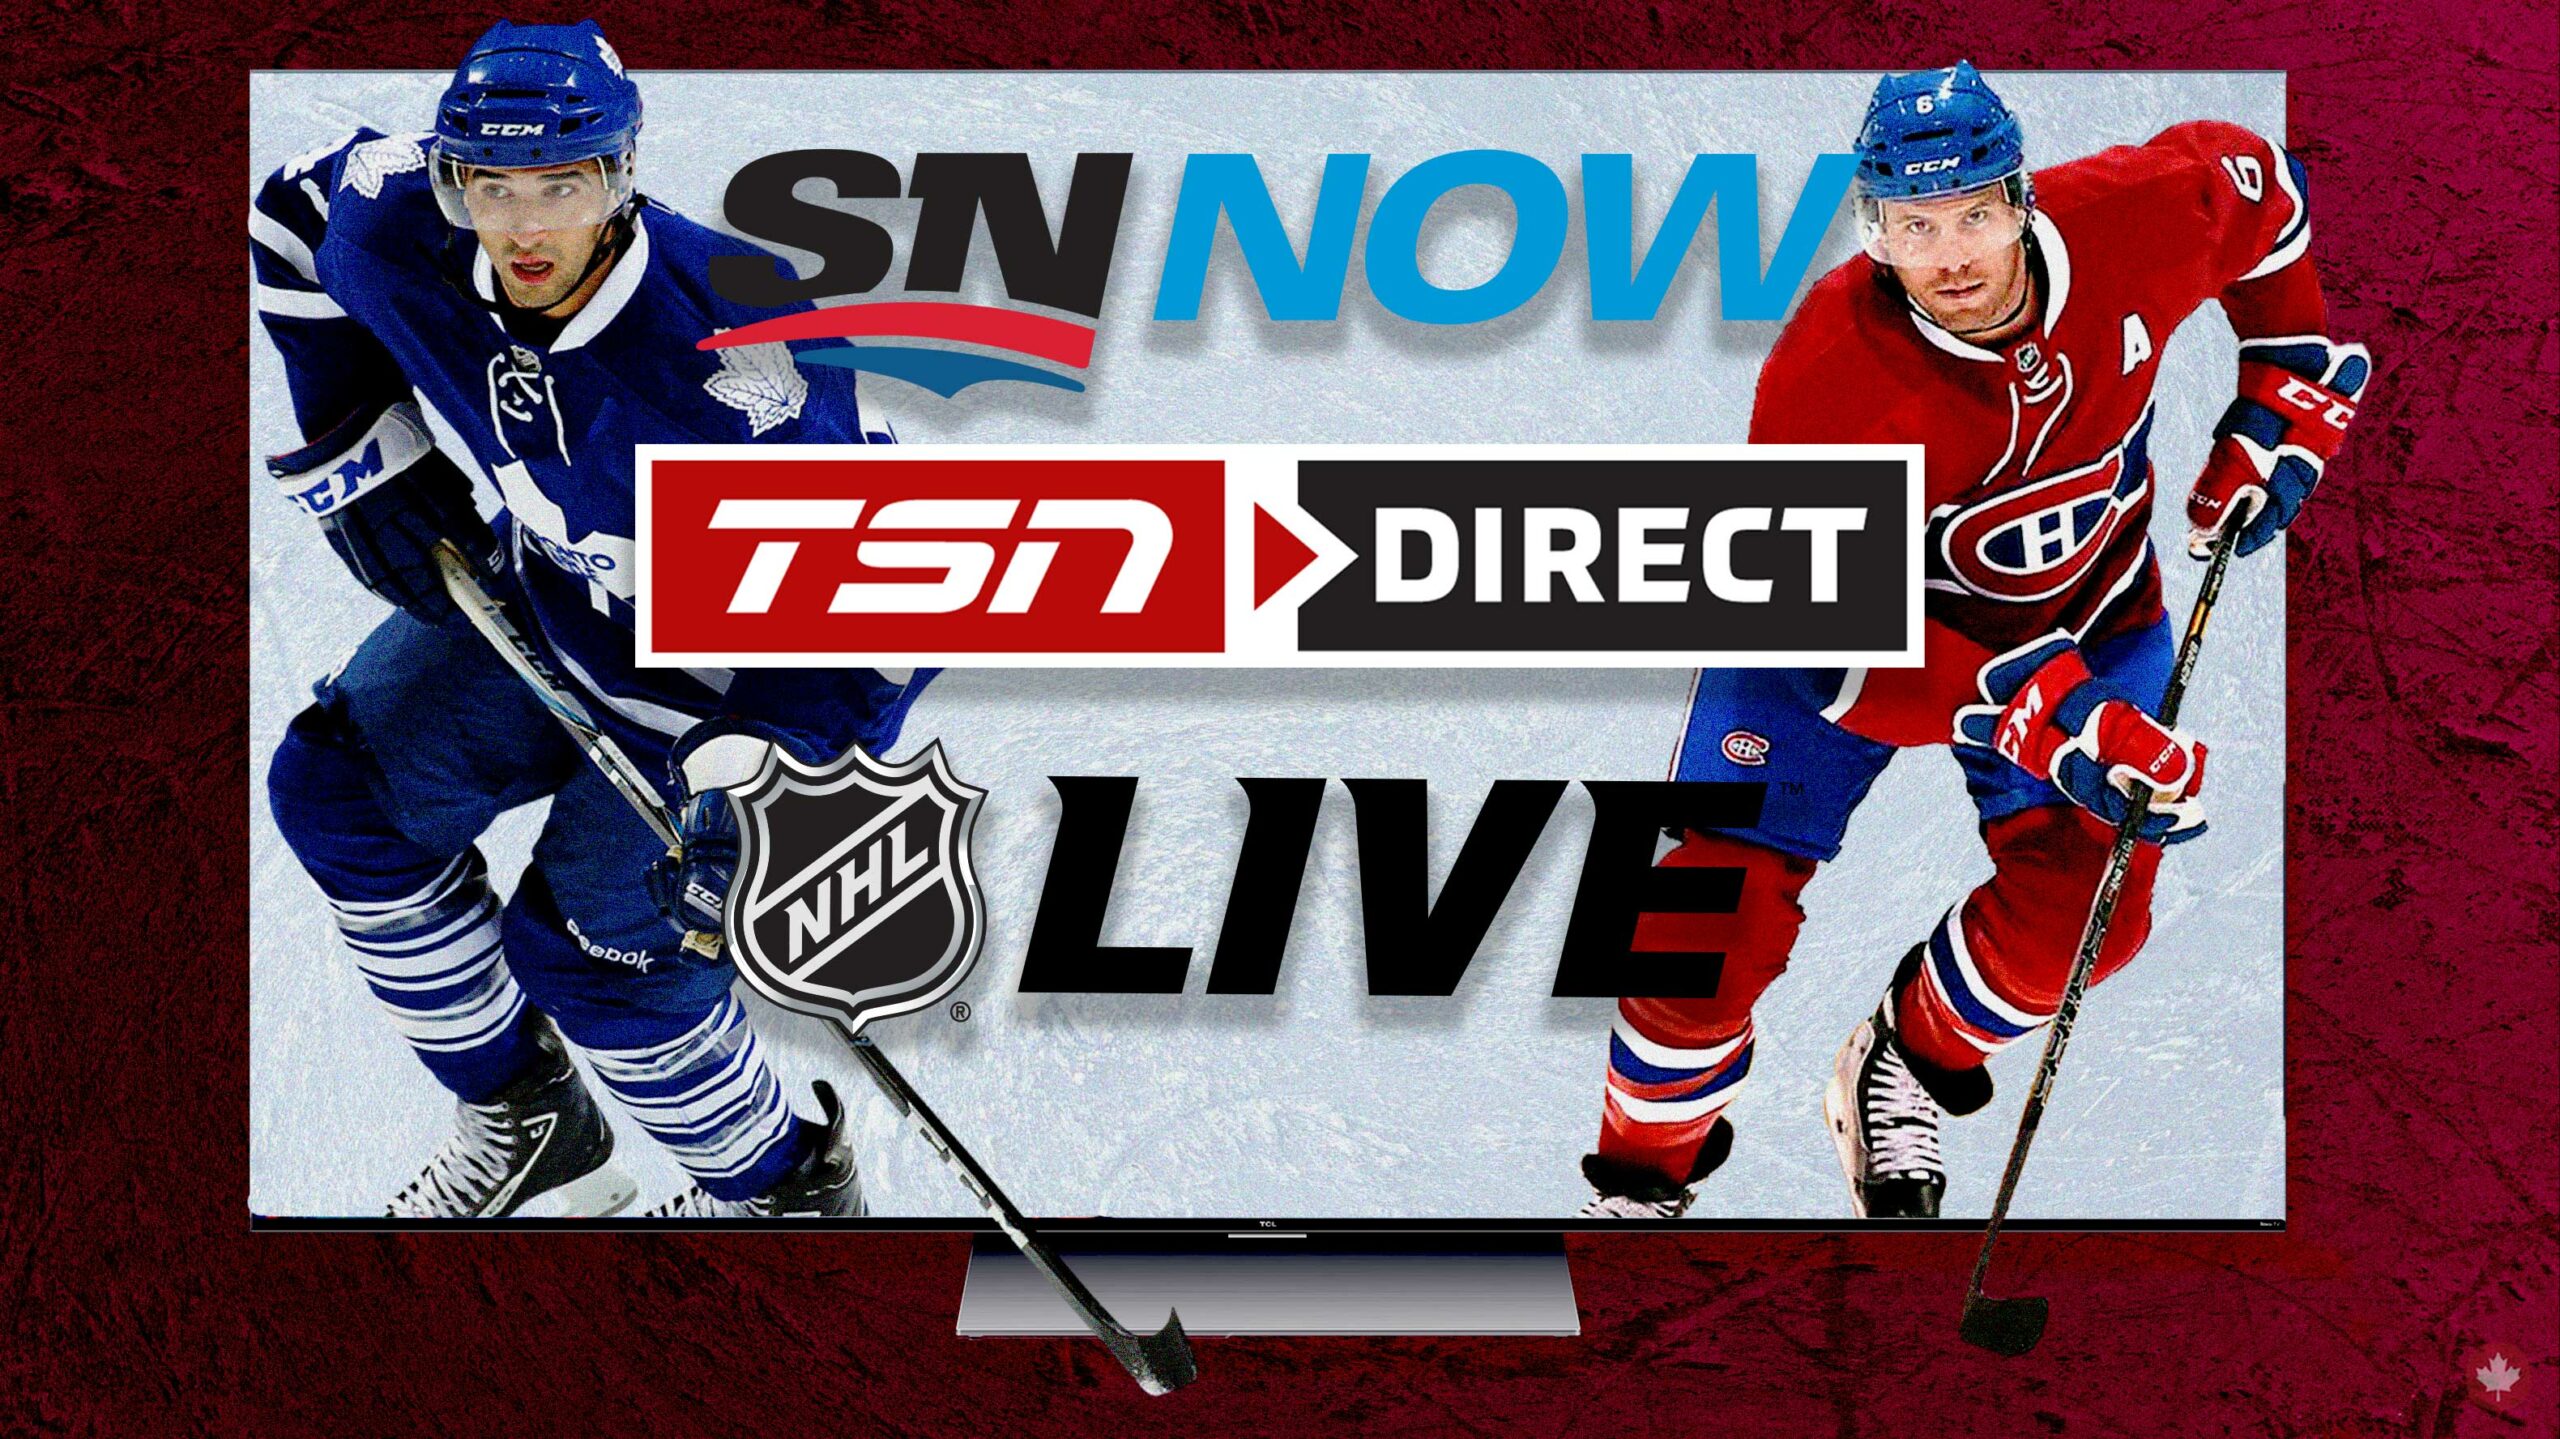 How to stream the NHLs 2021 season in Canada